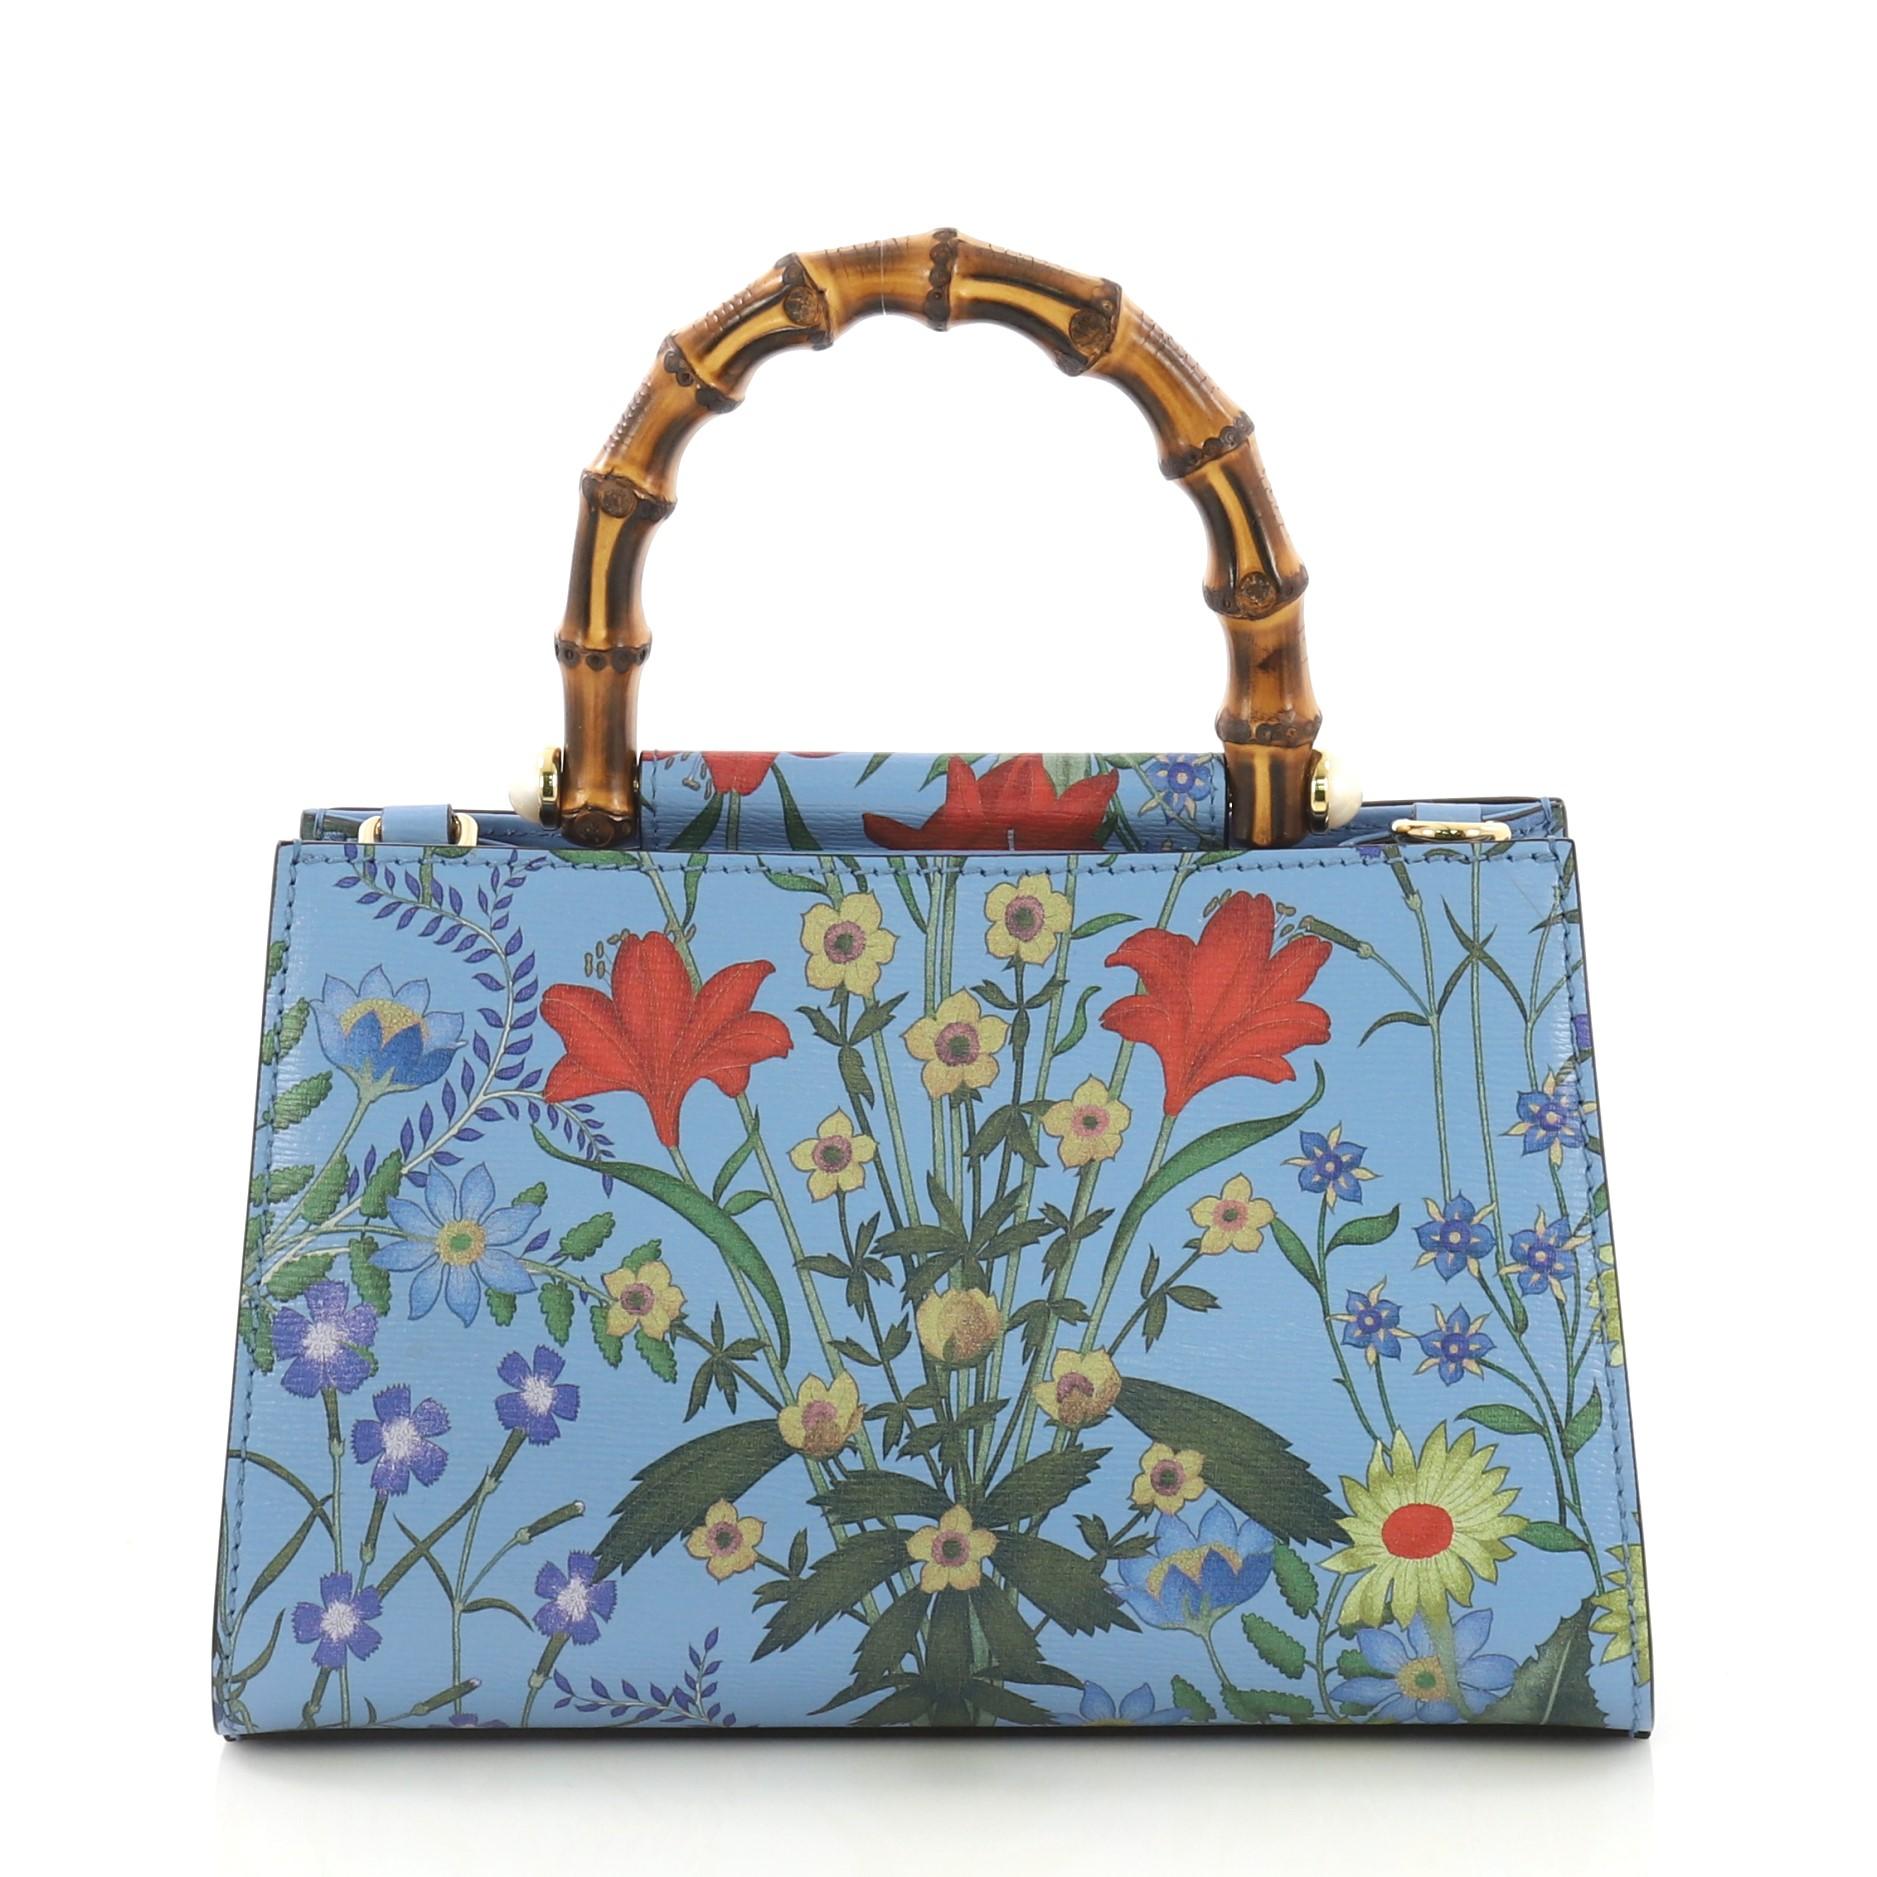 This Gucci Nymphaea Top Handle Bag Floral Print Leather Mini, crafted in floral print blue leather, features a bamboo handle with pearls and gold-tone hardware. Its magnetic snap closure opens to a beige microfiber interior with zip and slip